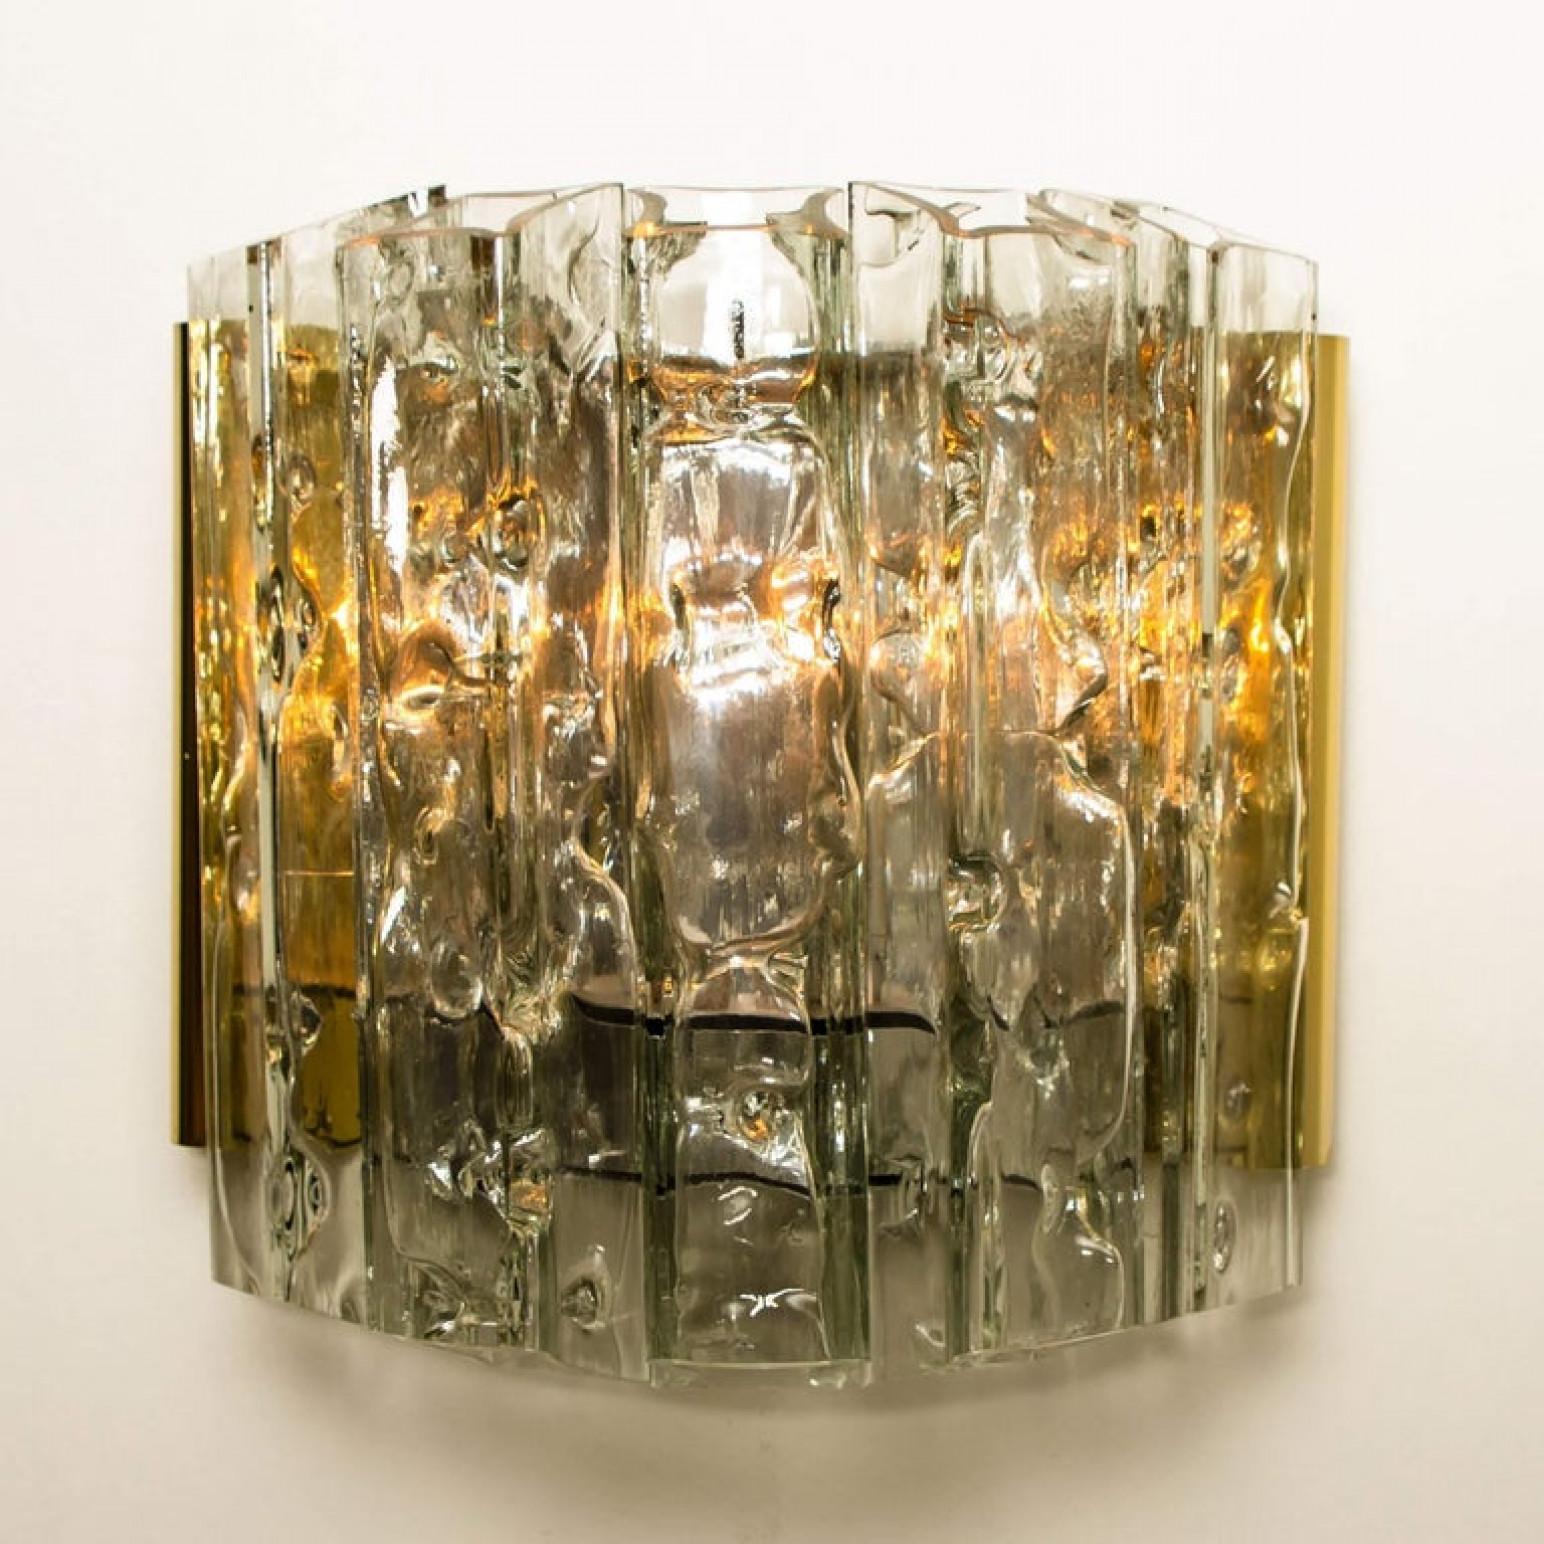 Austrian Pair of Midcentury Wall Lamps in Brass and Glass, 1970s For Sale